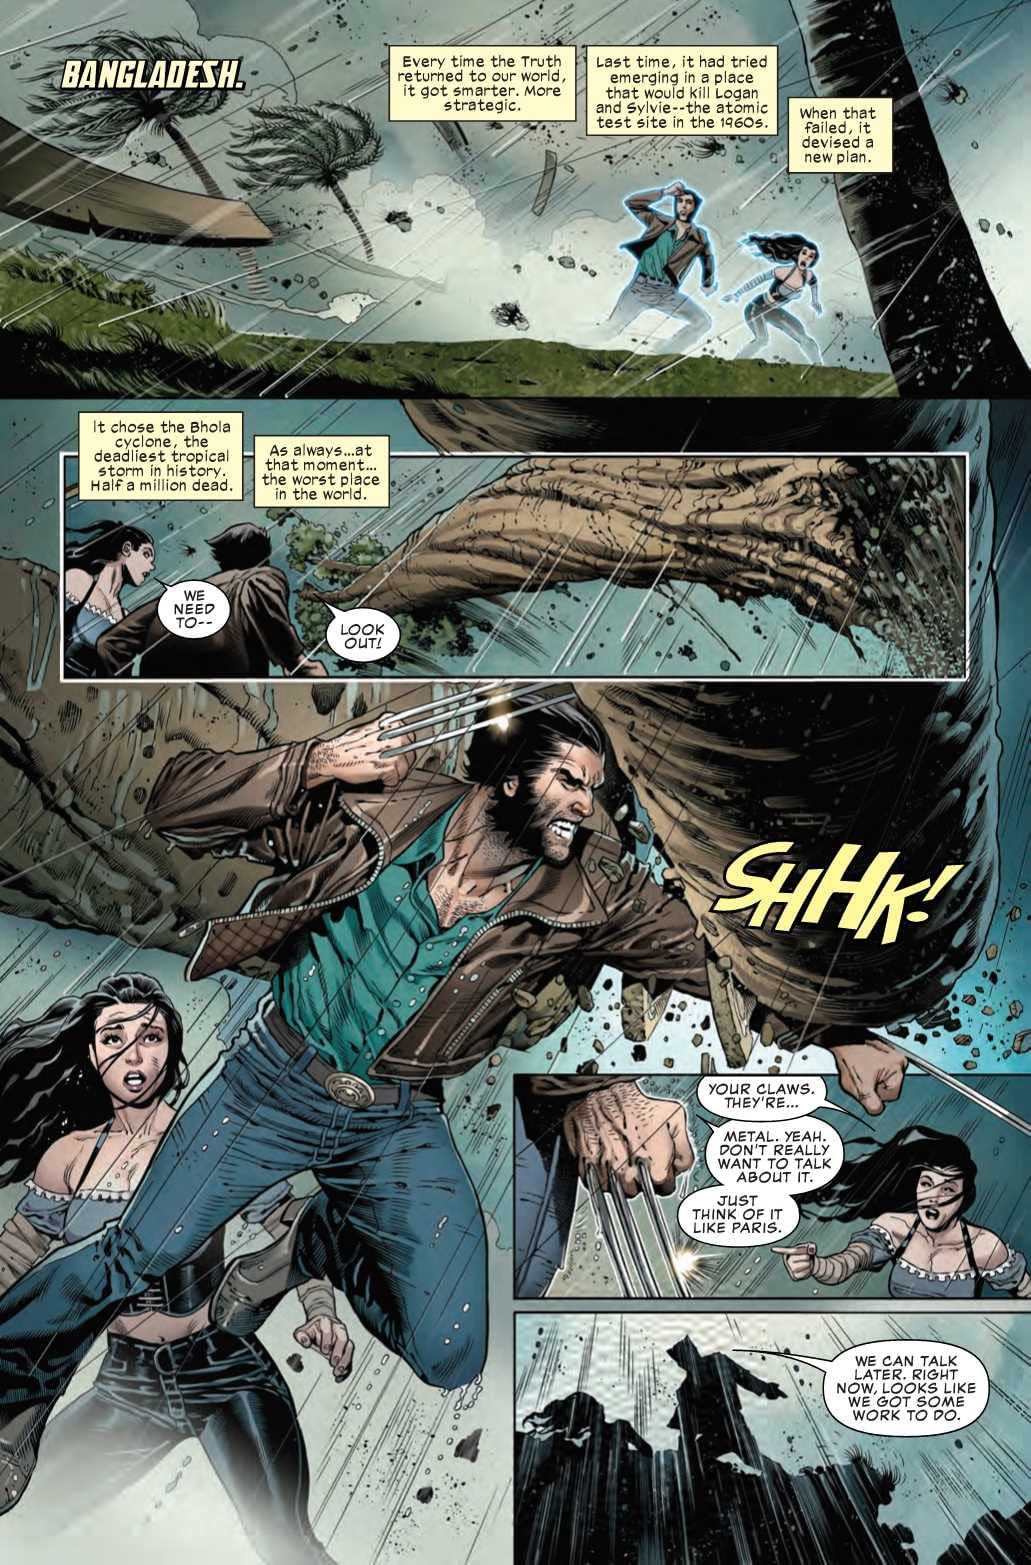 Would You Be Jealous if Wolverine Slept With Your Wife? Marvel Comics Presents #4 Preview